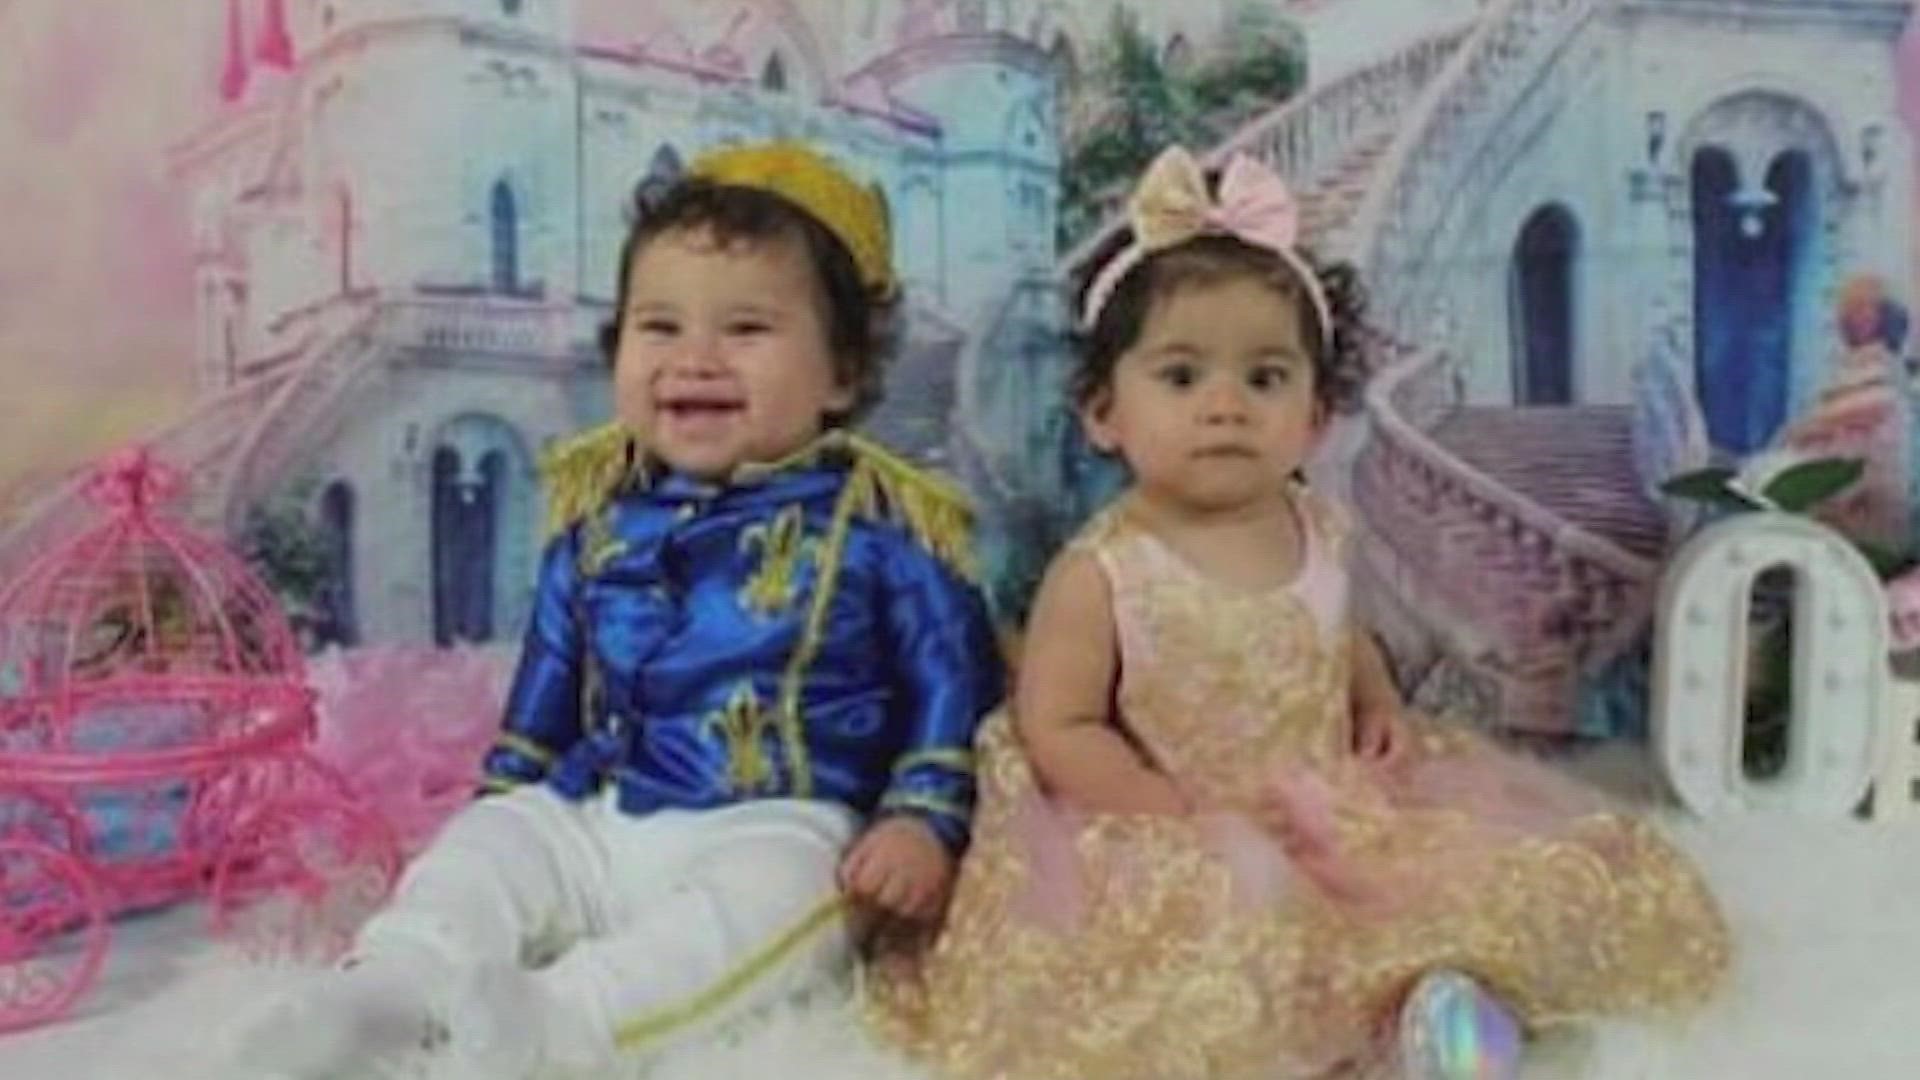 22-month-old Nicolas Resendiz died when a concrete mixer flew off an overpass and landed on his family's SUV. He and his sister were to be baptized this Saturday.